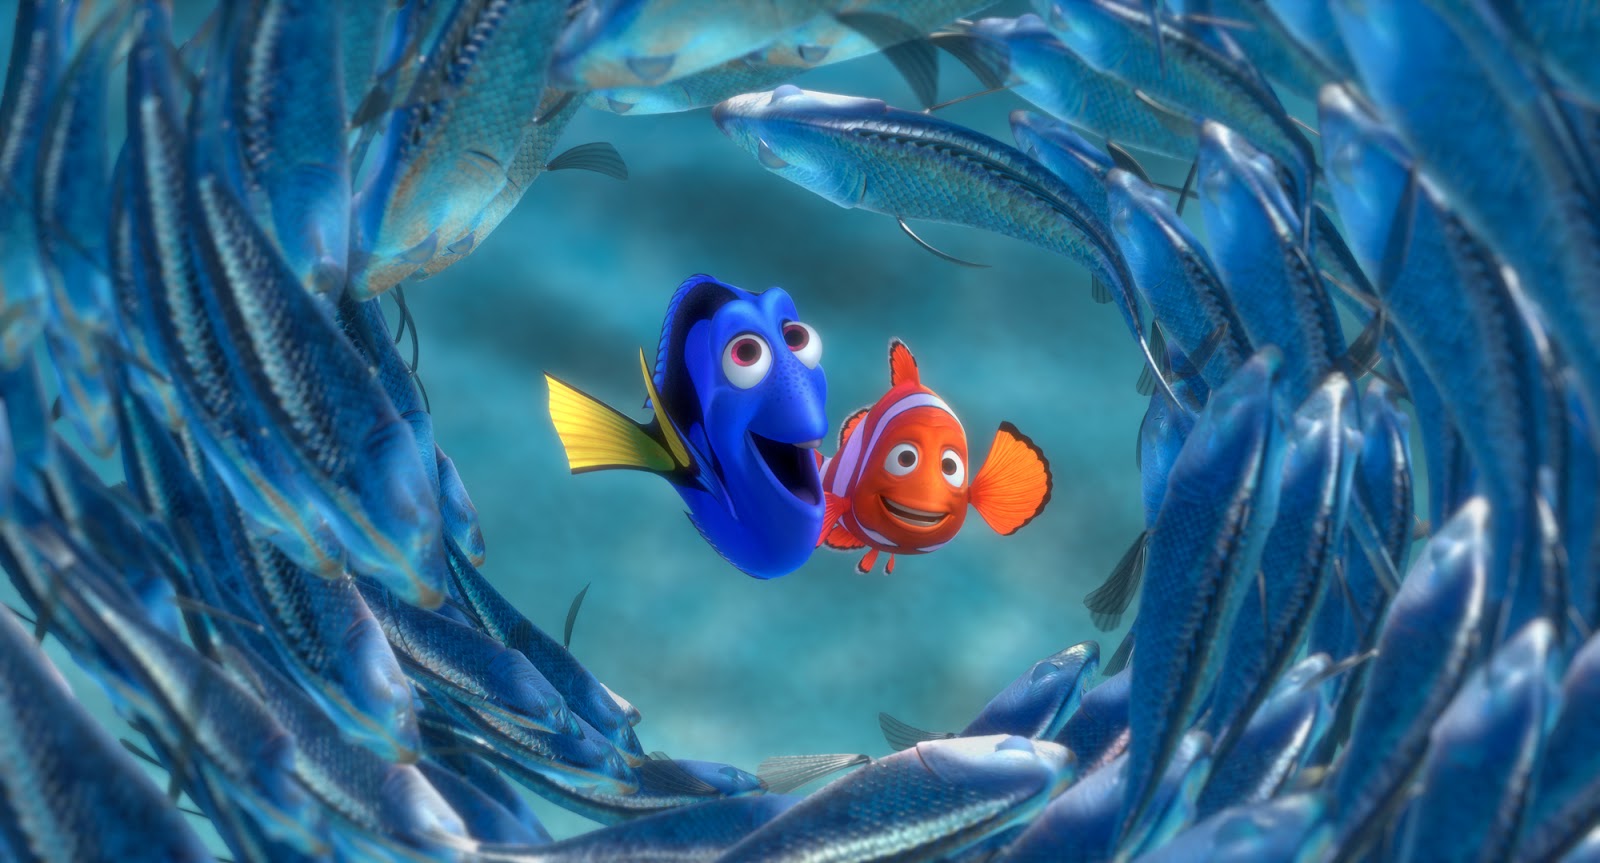 Finding Nemo Full HD Image Wallpaper for iPhone 6 - Cartoons ...